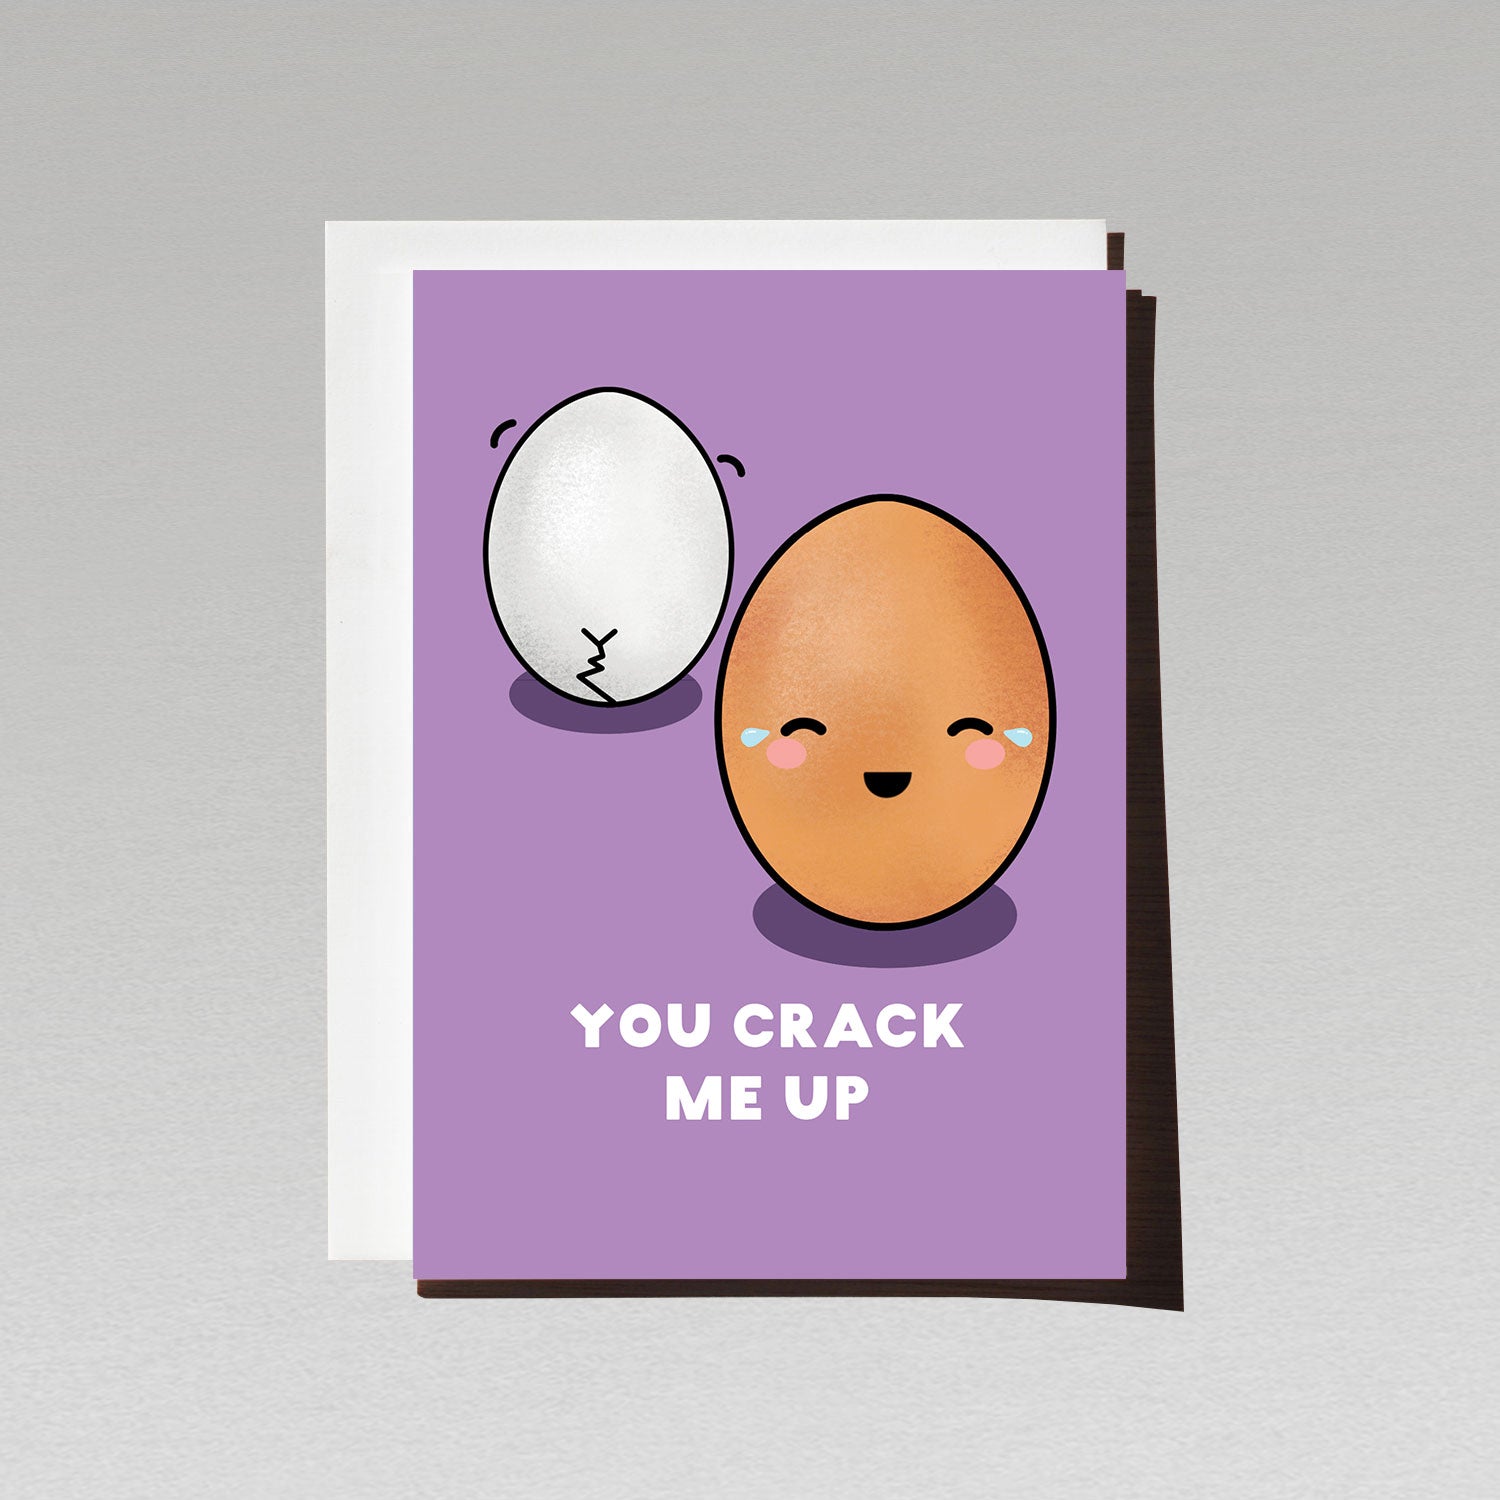 Greeting card with two cute egg characters one walking away with crack in its shell like a bum crack the other laughing facing forward on purple background with text You Crack me up